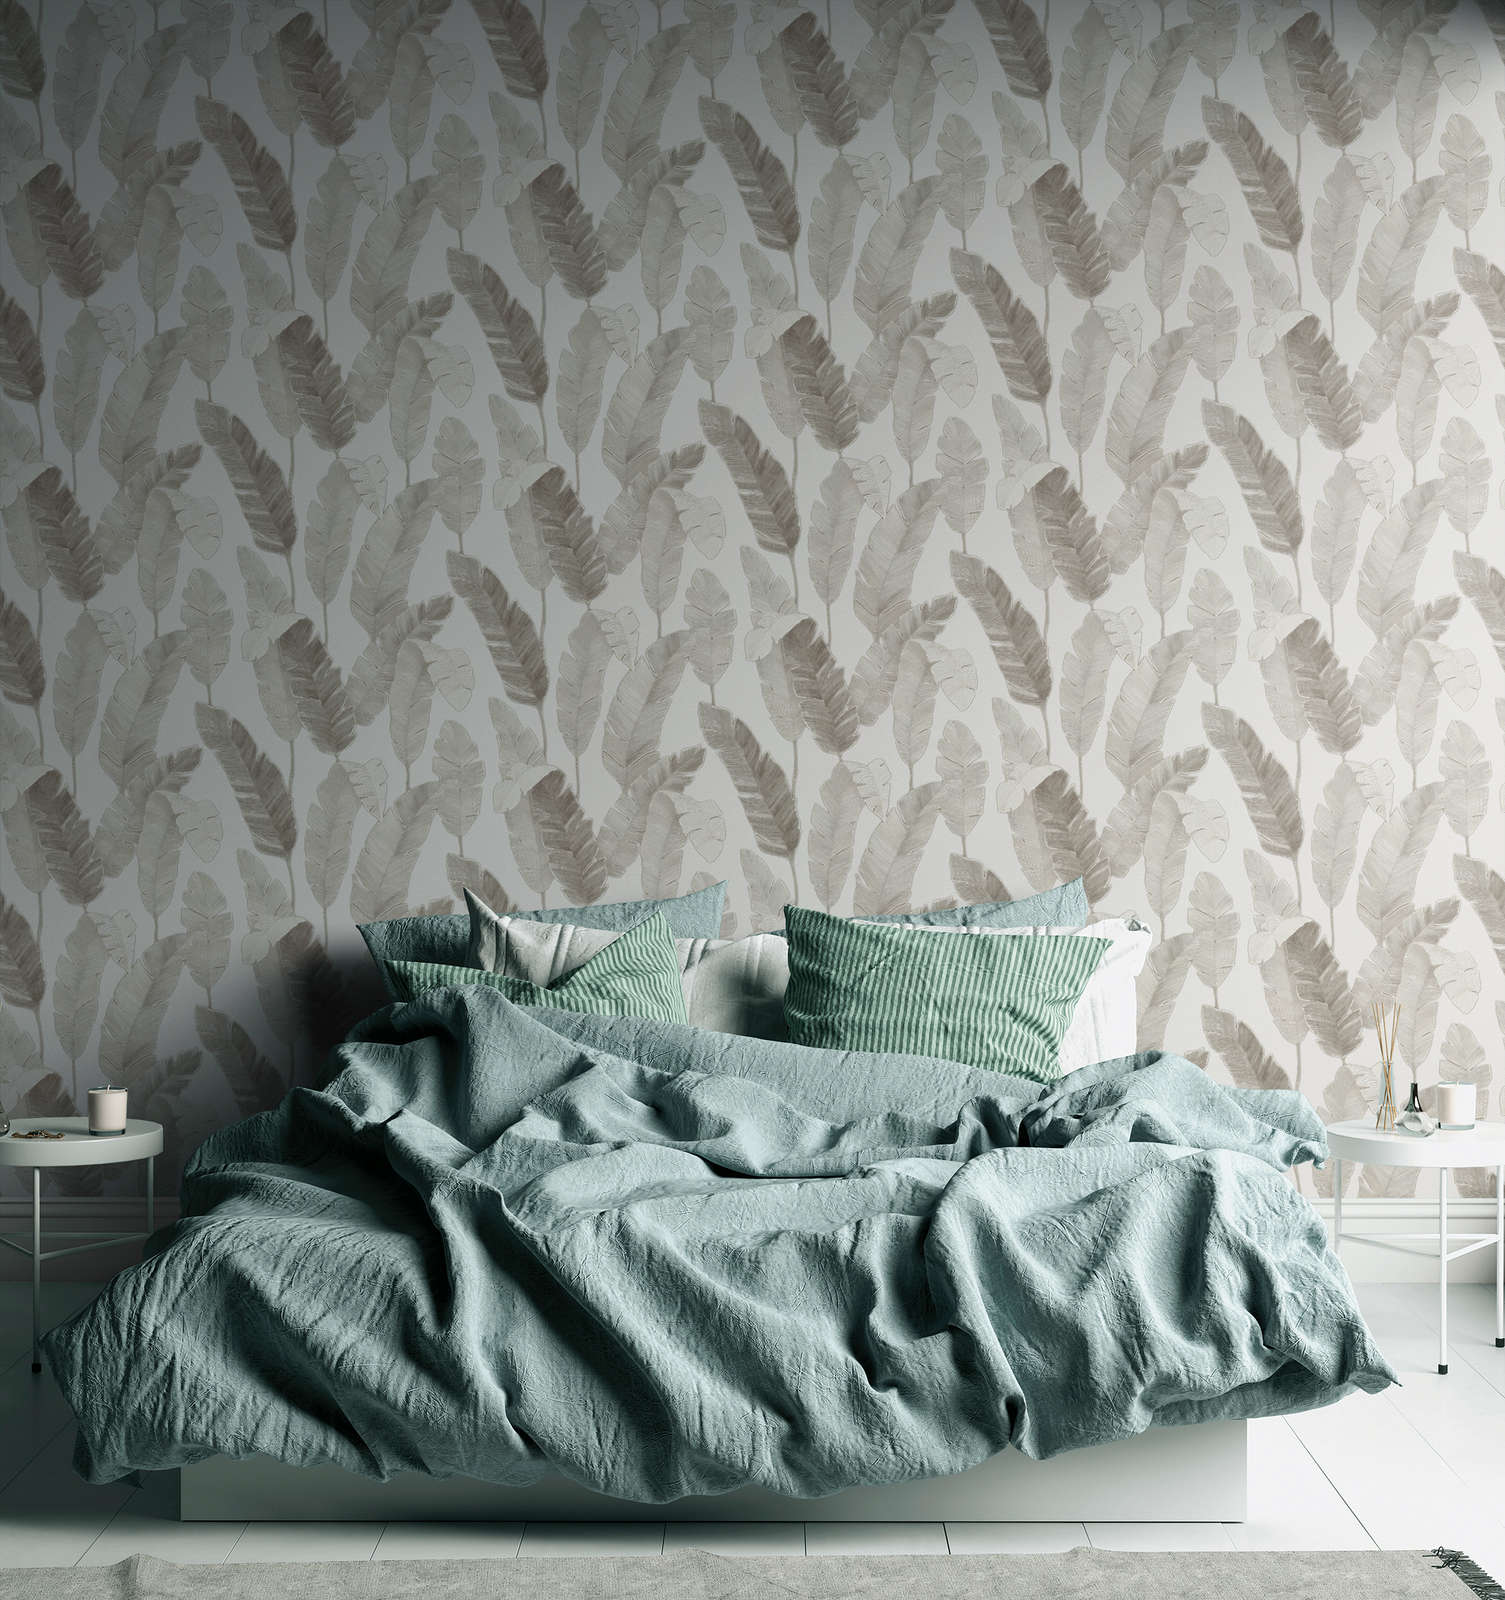             Non-woven wallpaper with subtle palm leaves - white, beige, grey
        